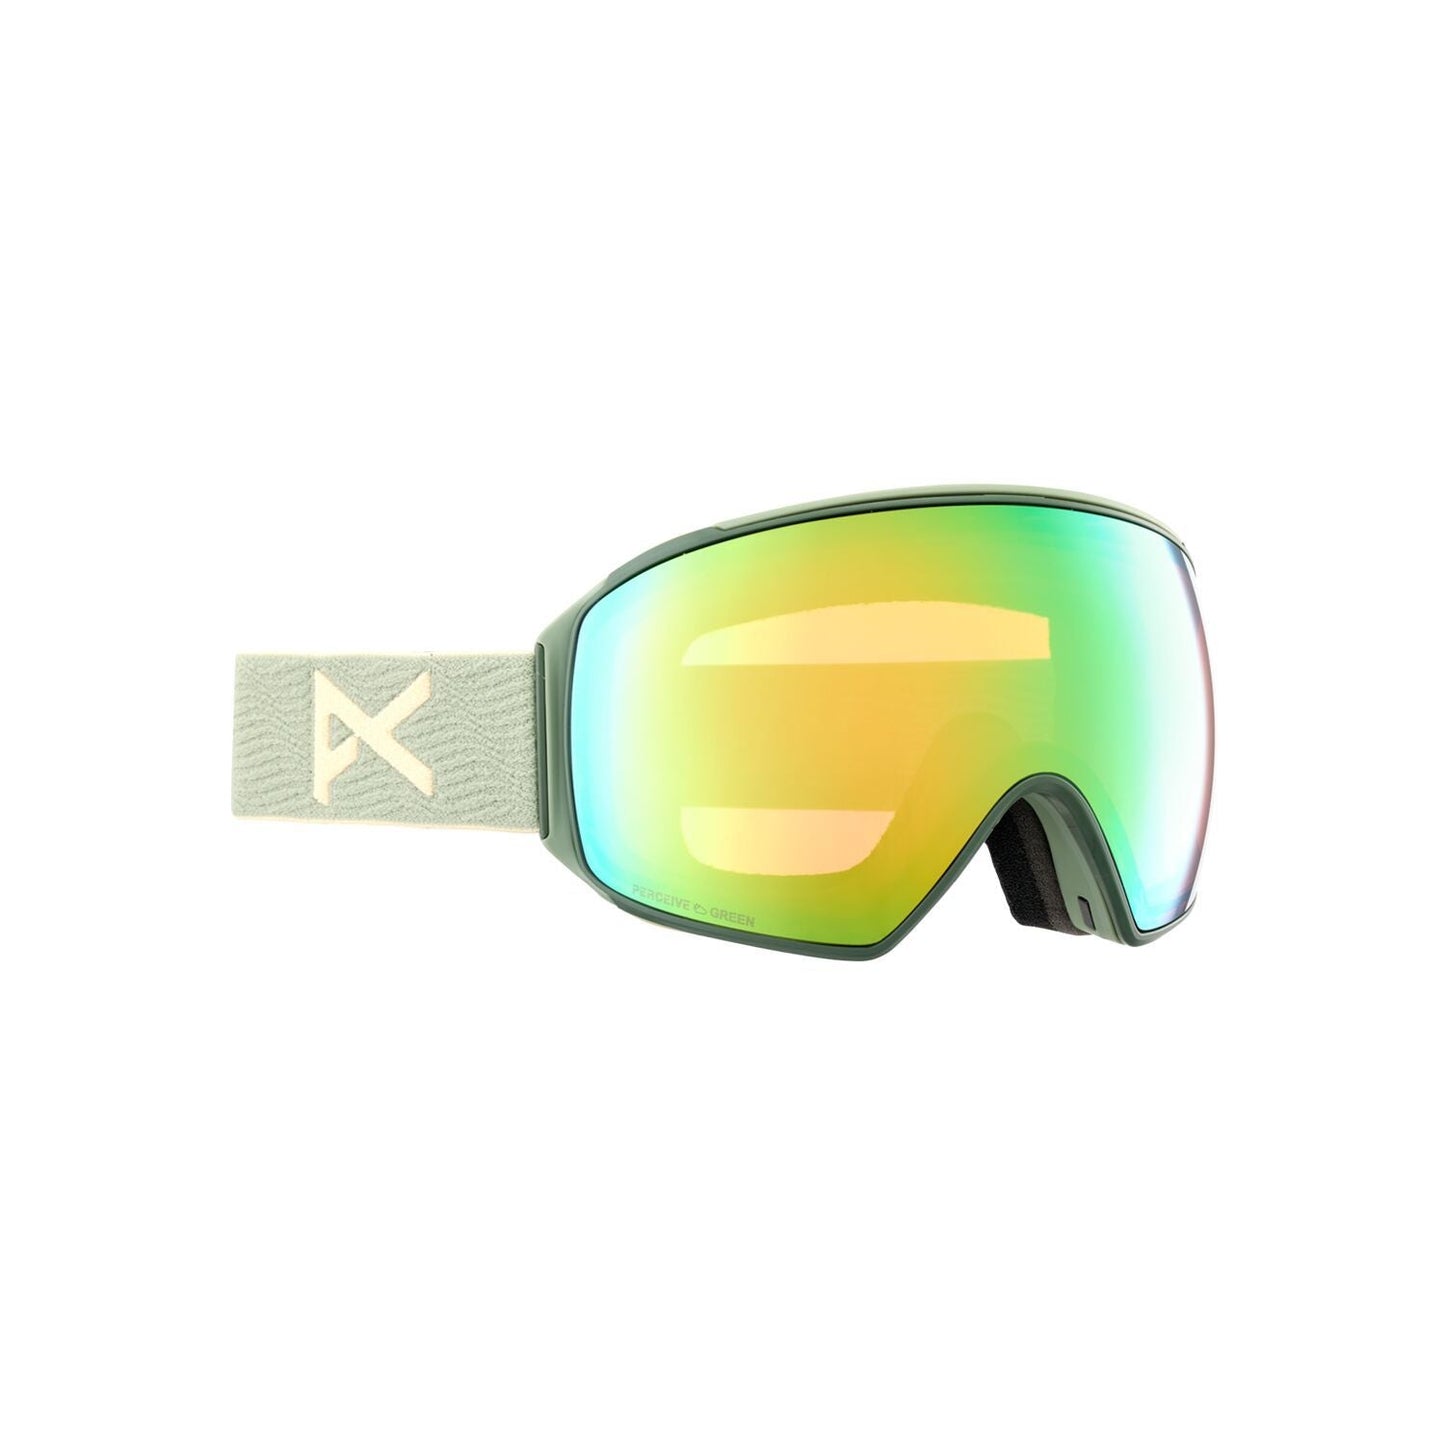 Anon M4 Toric Goggles + Bonus Lens + MFI Face Mask - Openbox Hedge Perceive Variable Green - Anon Snow Goggles